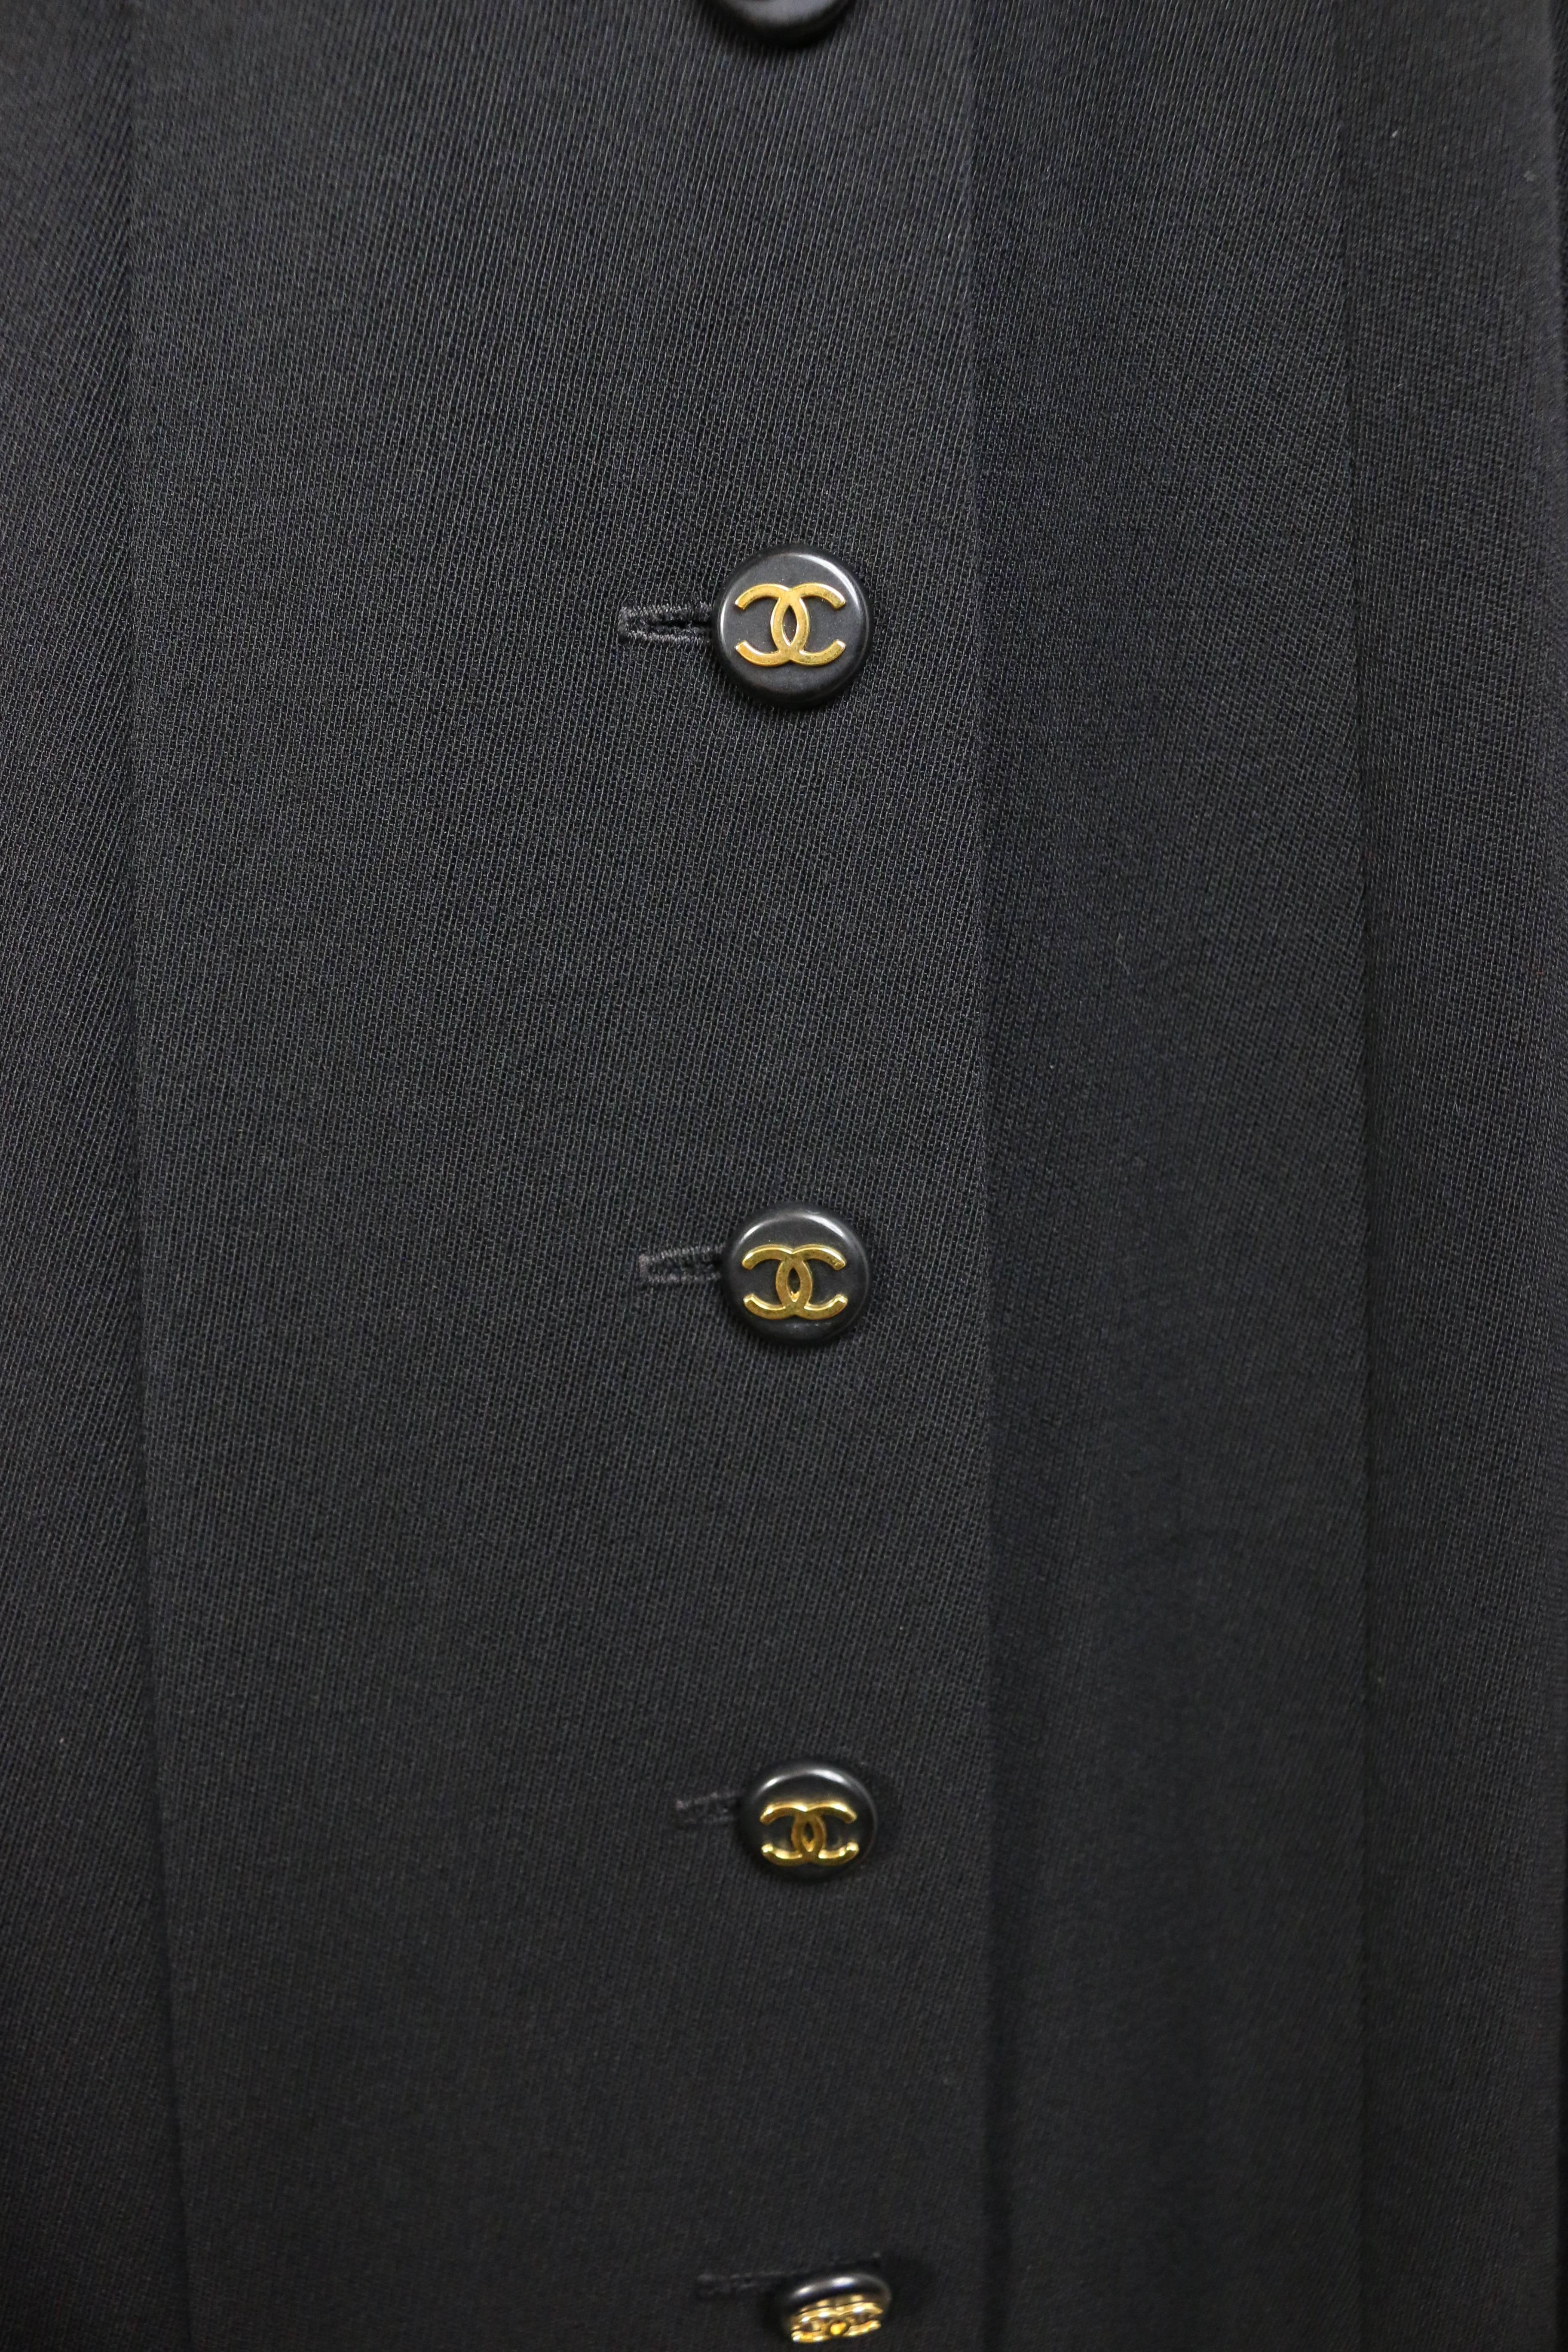 - Vintage Chanel black wool A-Line long skirt from 1994 collection. 

- Featuring ten front panel gold "CC" logo buttons and two side pockets. 

- Size 38. 

- 100% Wool, 100% Silk double lining. 

